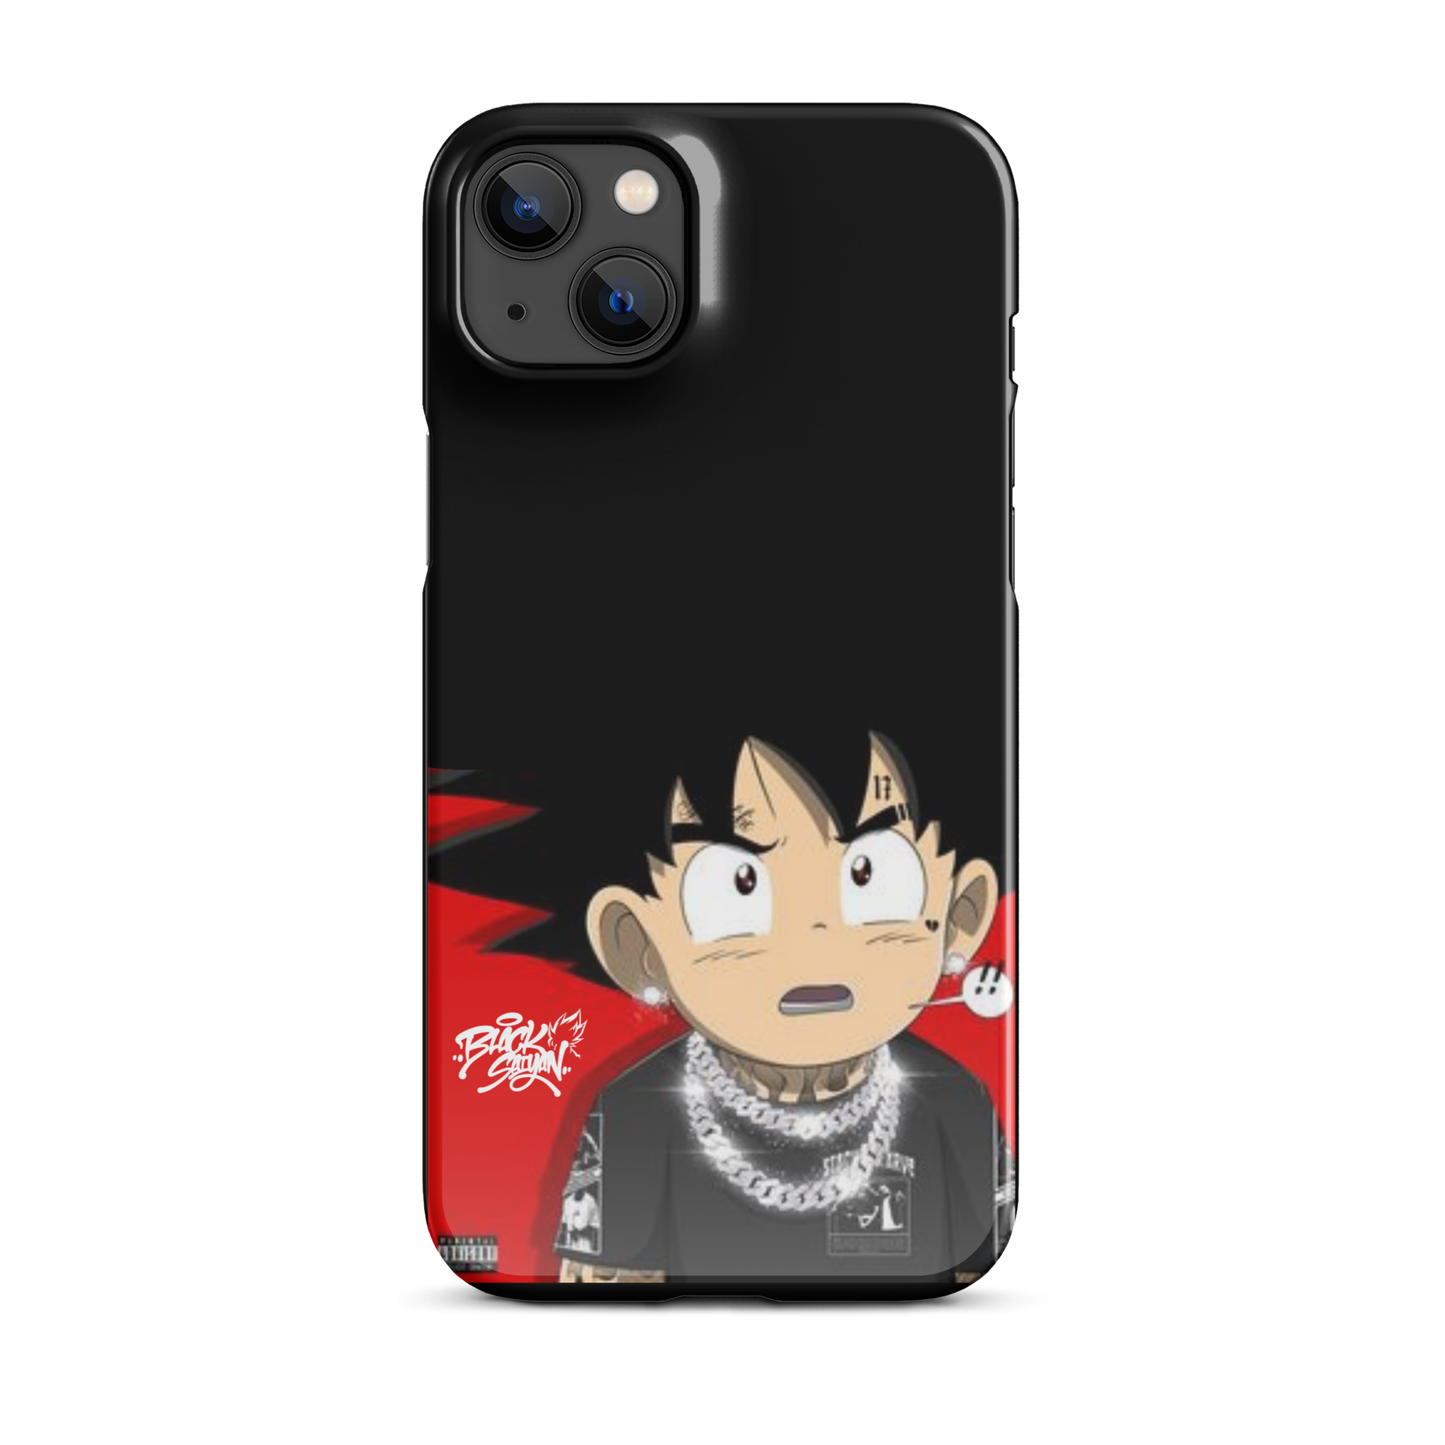 CRYBABY GOKU VVS - Snap case for iPhone®